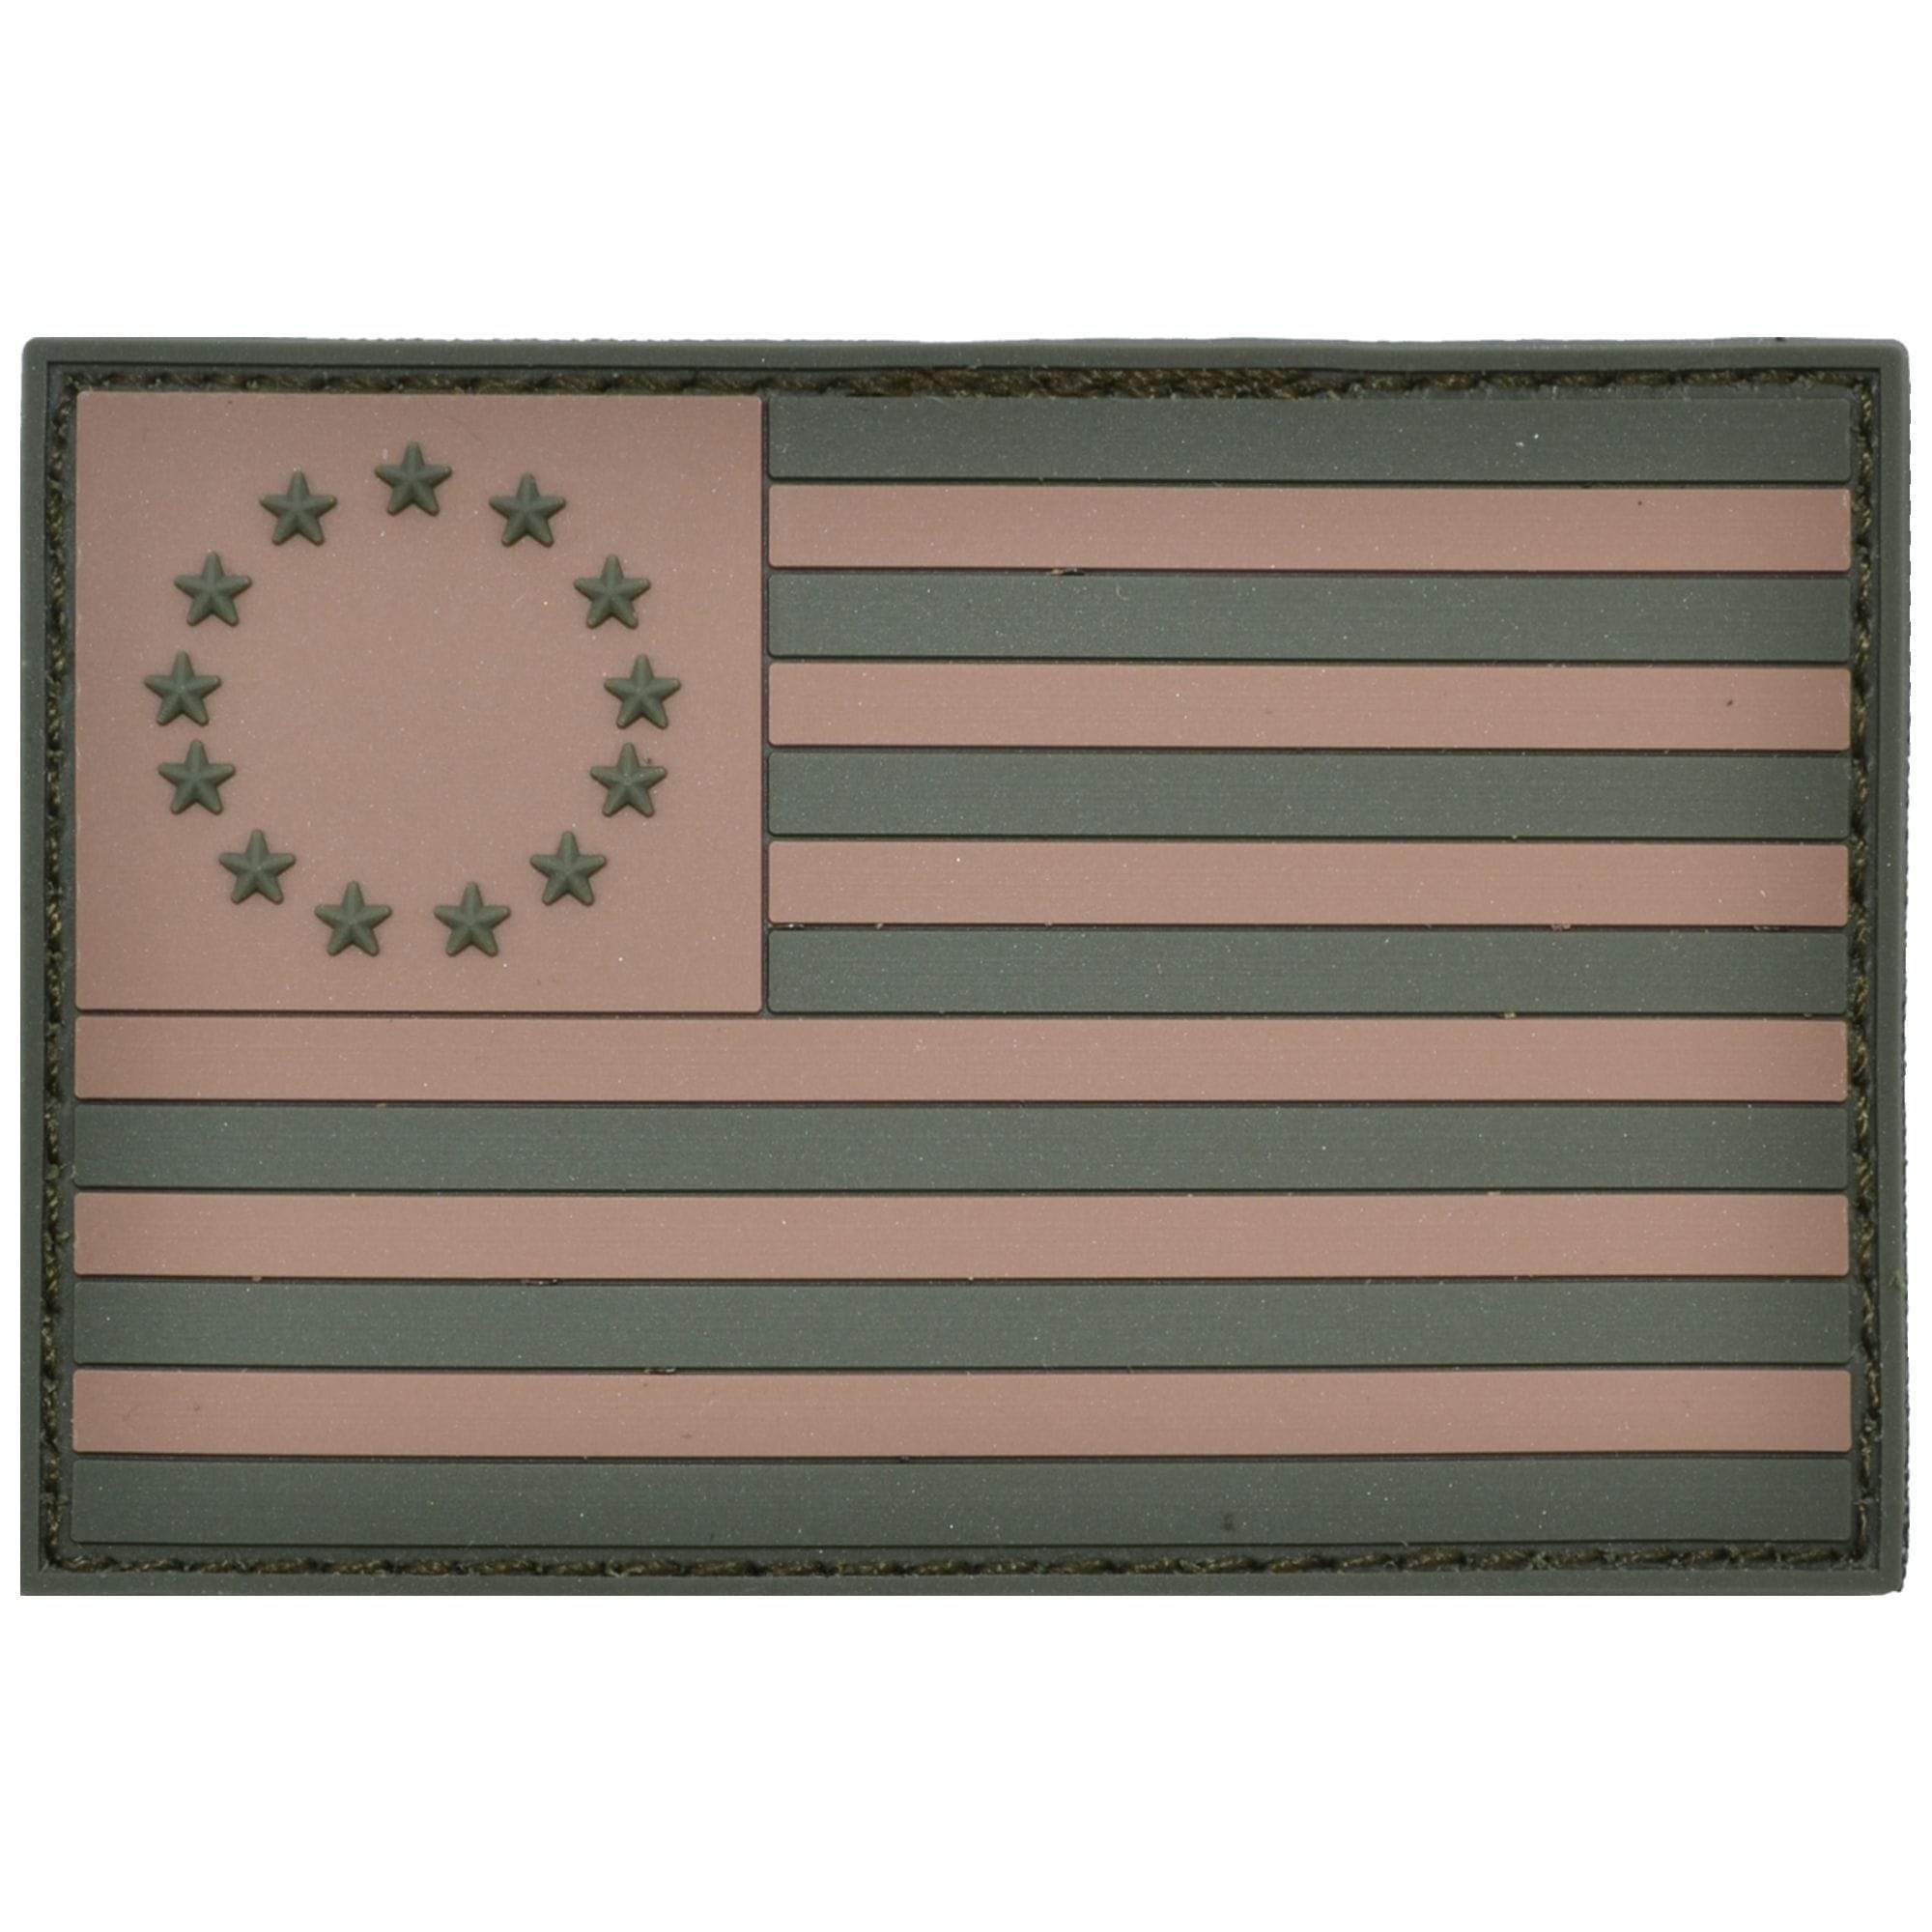 Tactical Gear Junkie Patches Olive Drab/Coyote Betsy Ross US Flag Full Color - 2x3 PVC Patch - Multiple Colors